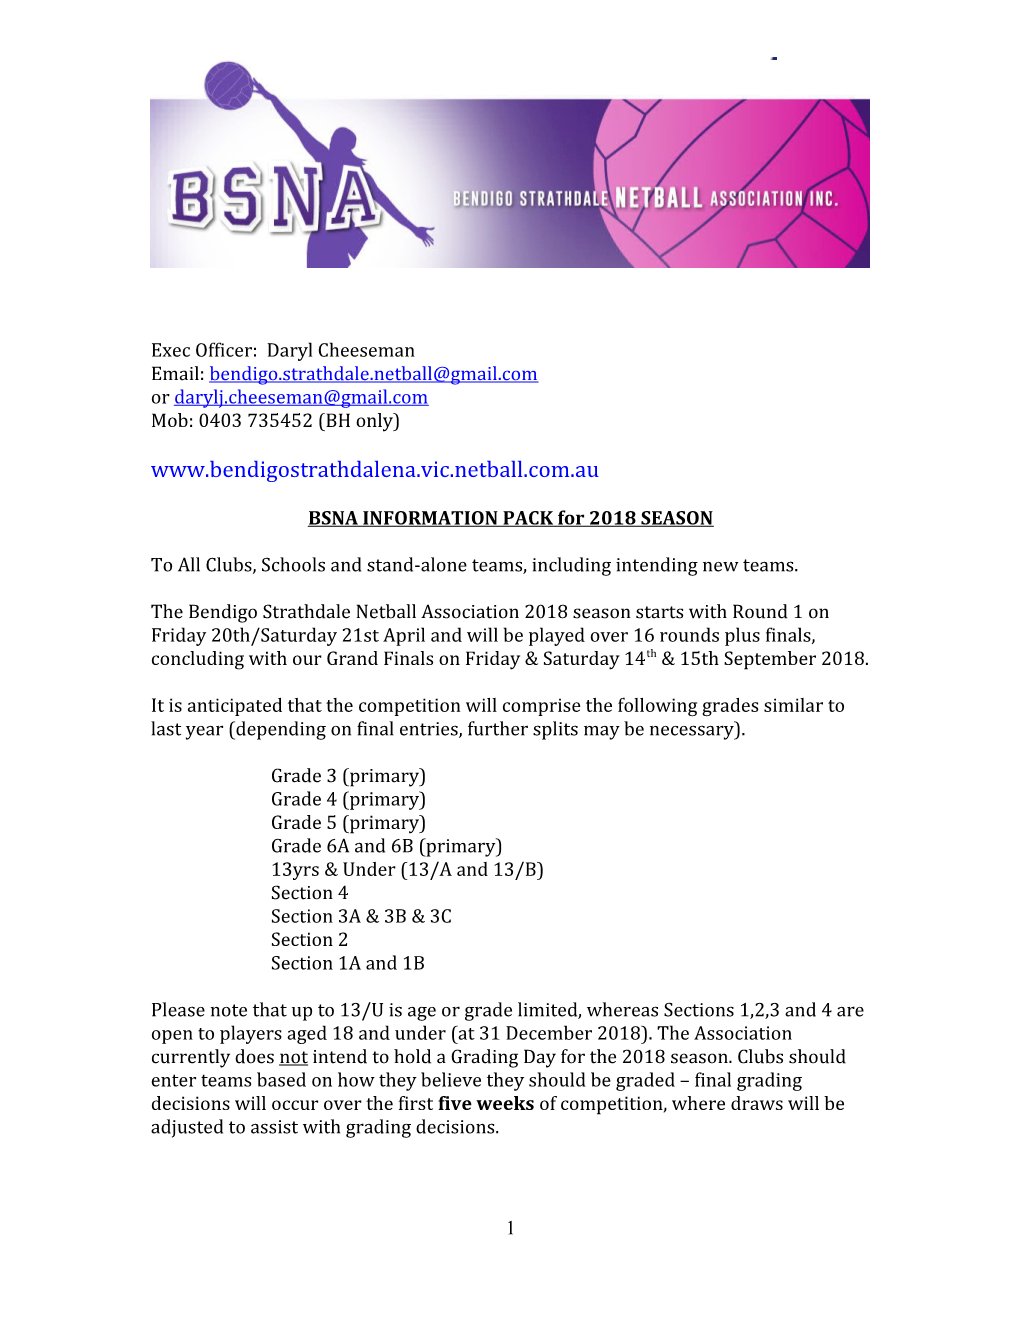 BSNA INFORMATION PACK for 2018SEASON